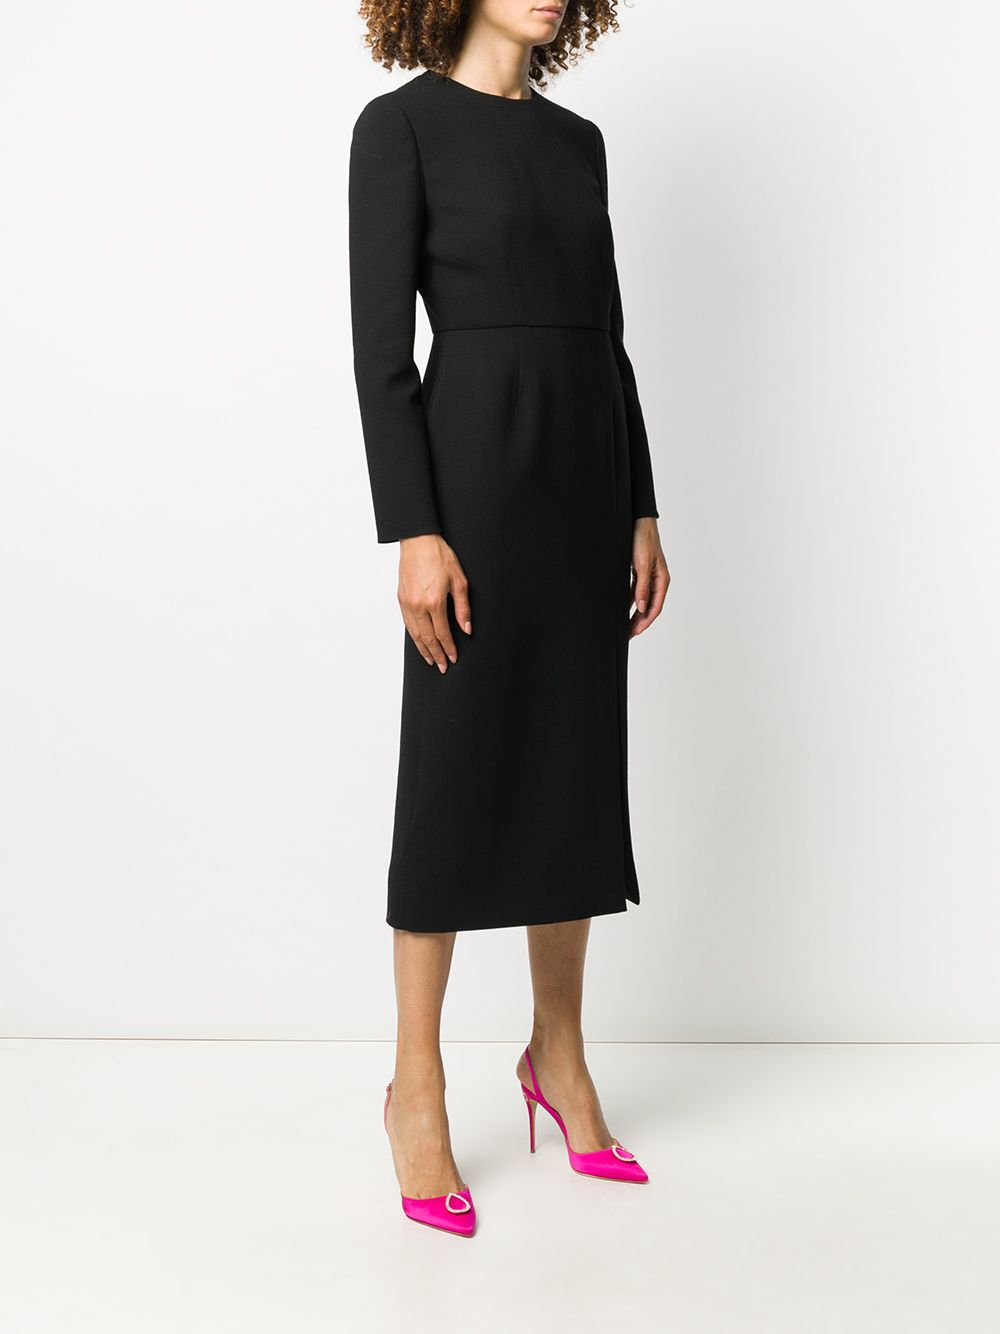 Shop Valentino slit detail midi dress with Express Delivery - FARFETCH